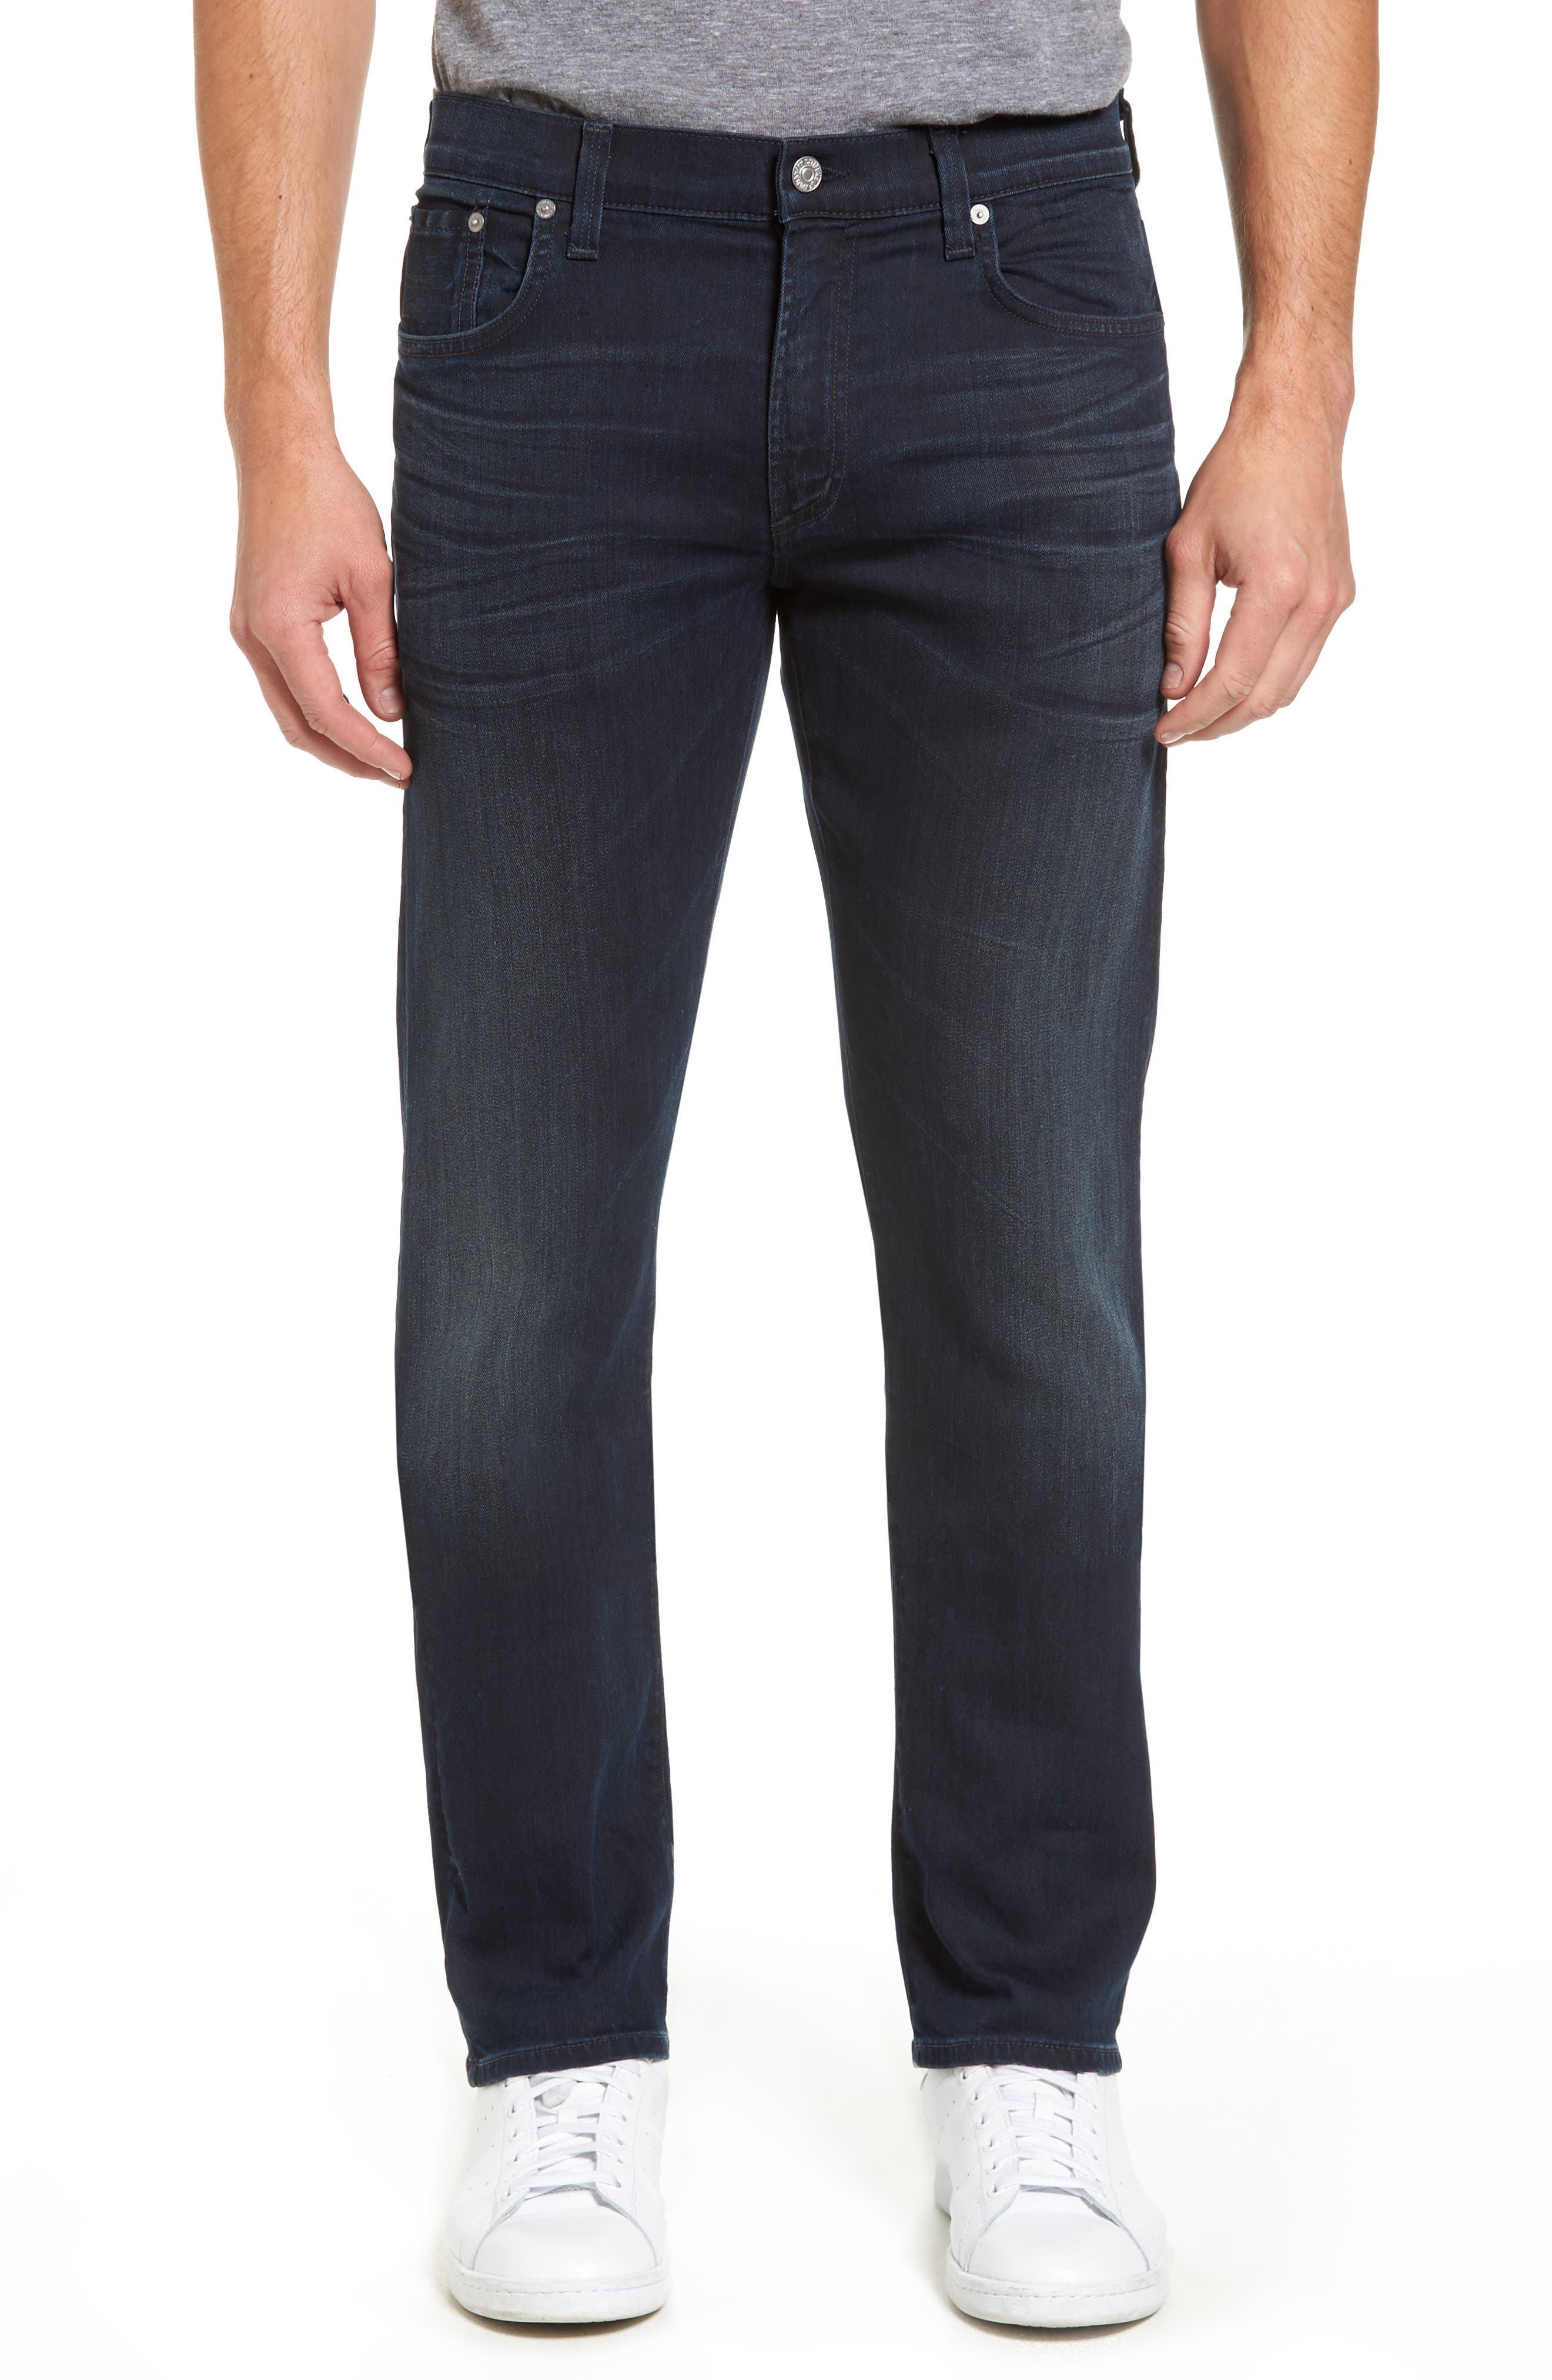 citizens of humanity core jeans